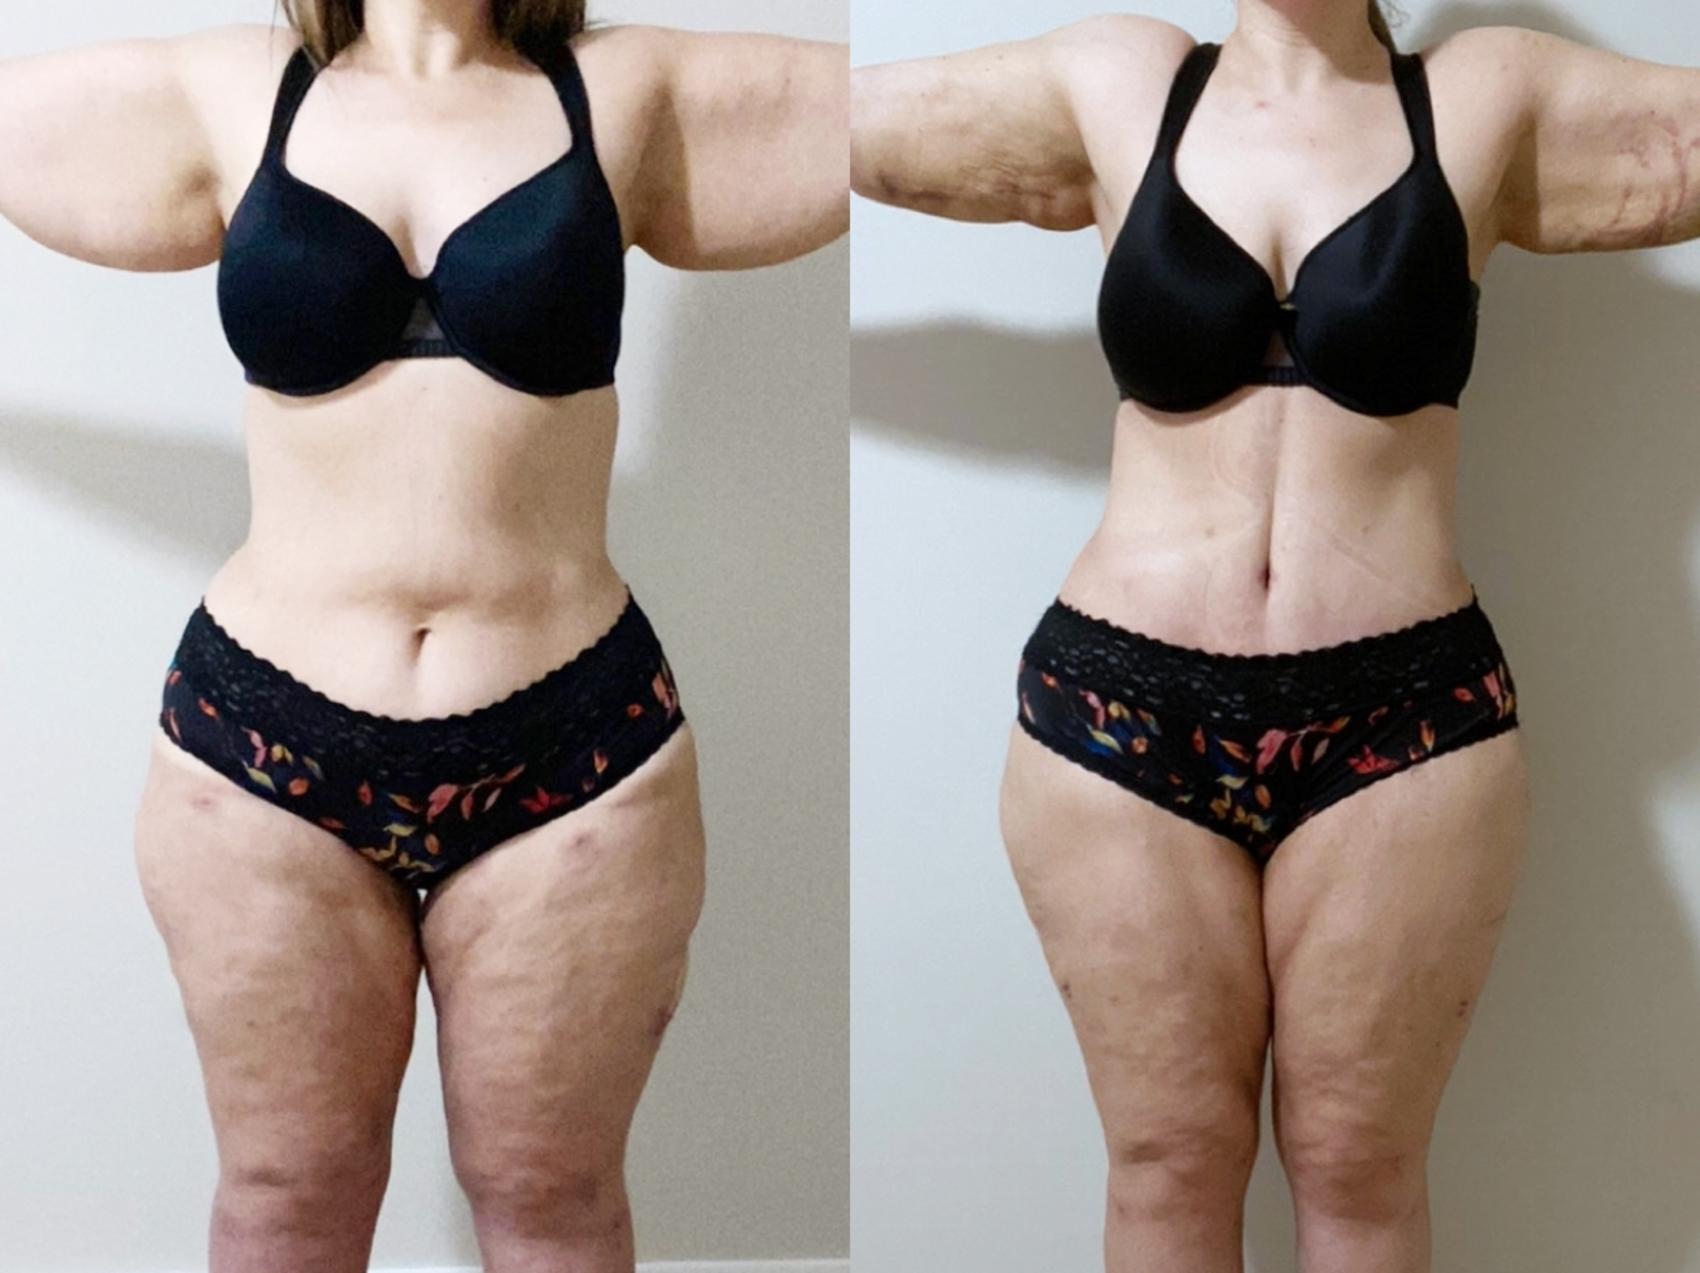 Awake Tummy Tuck Amazing Before & After Results (6 Months Post